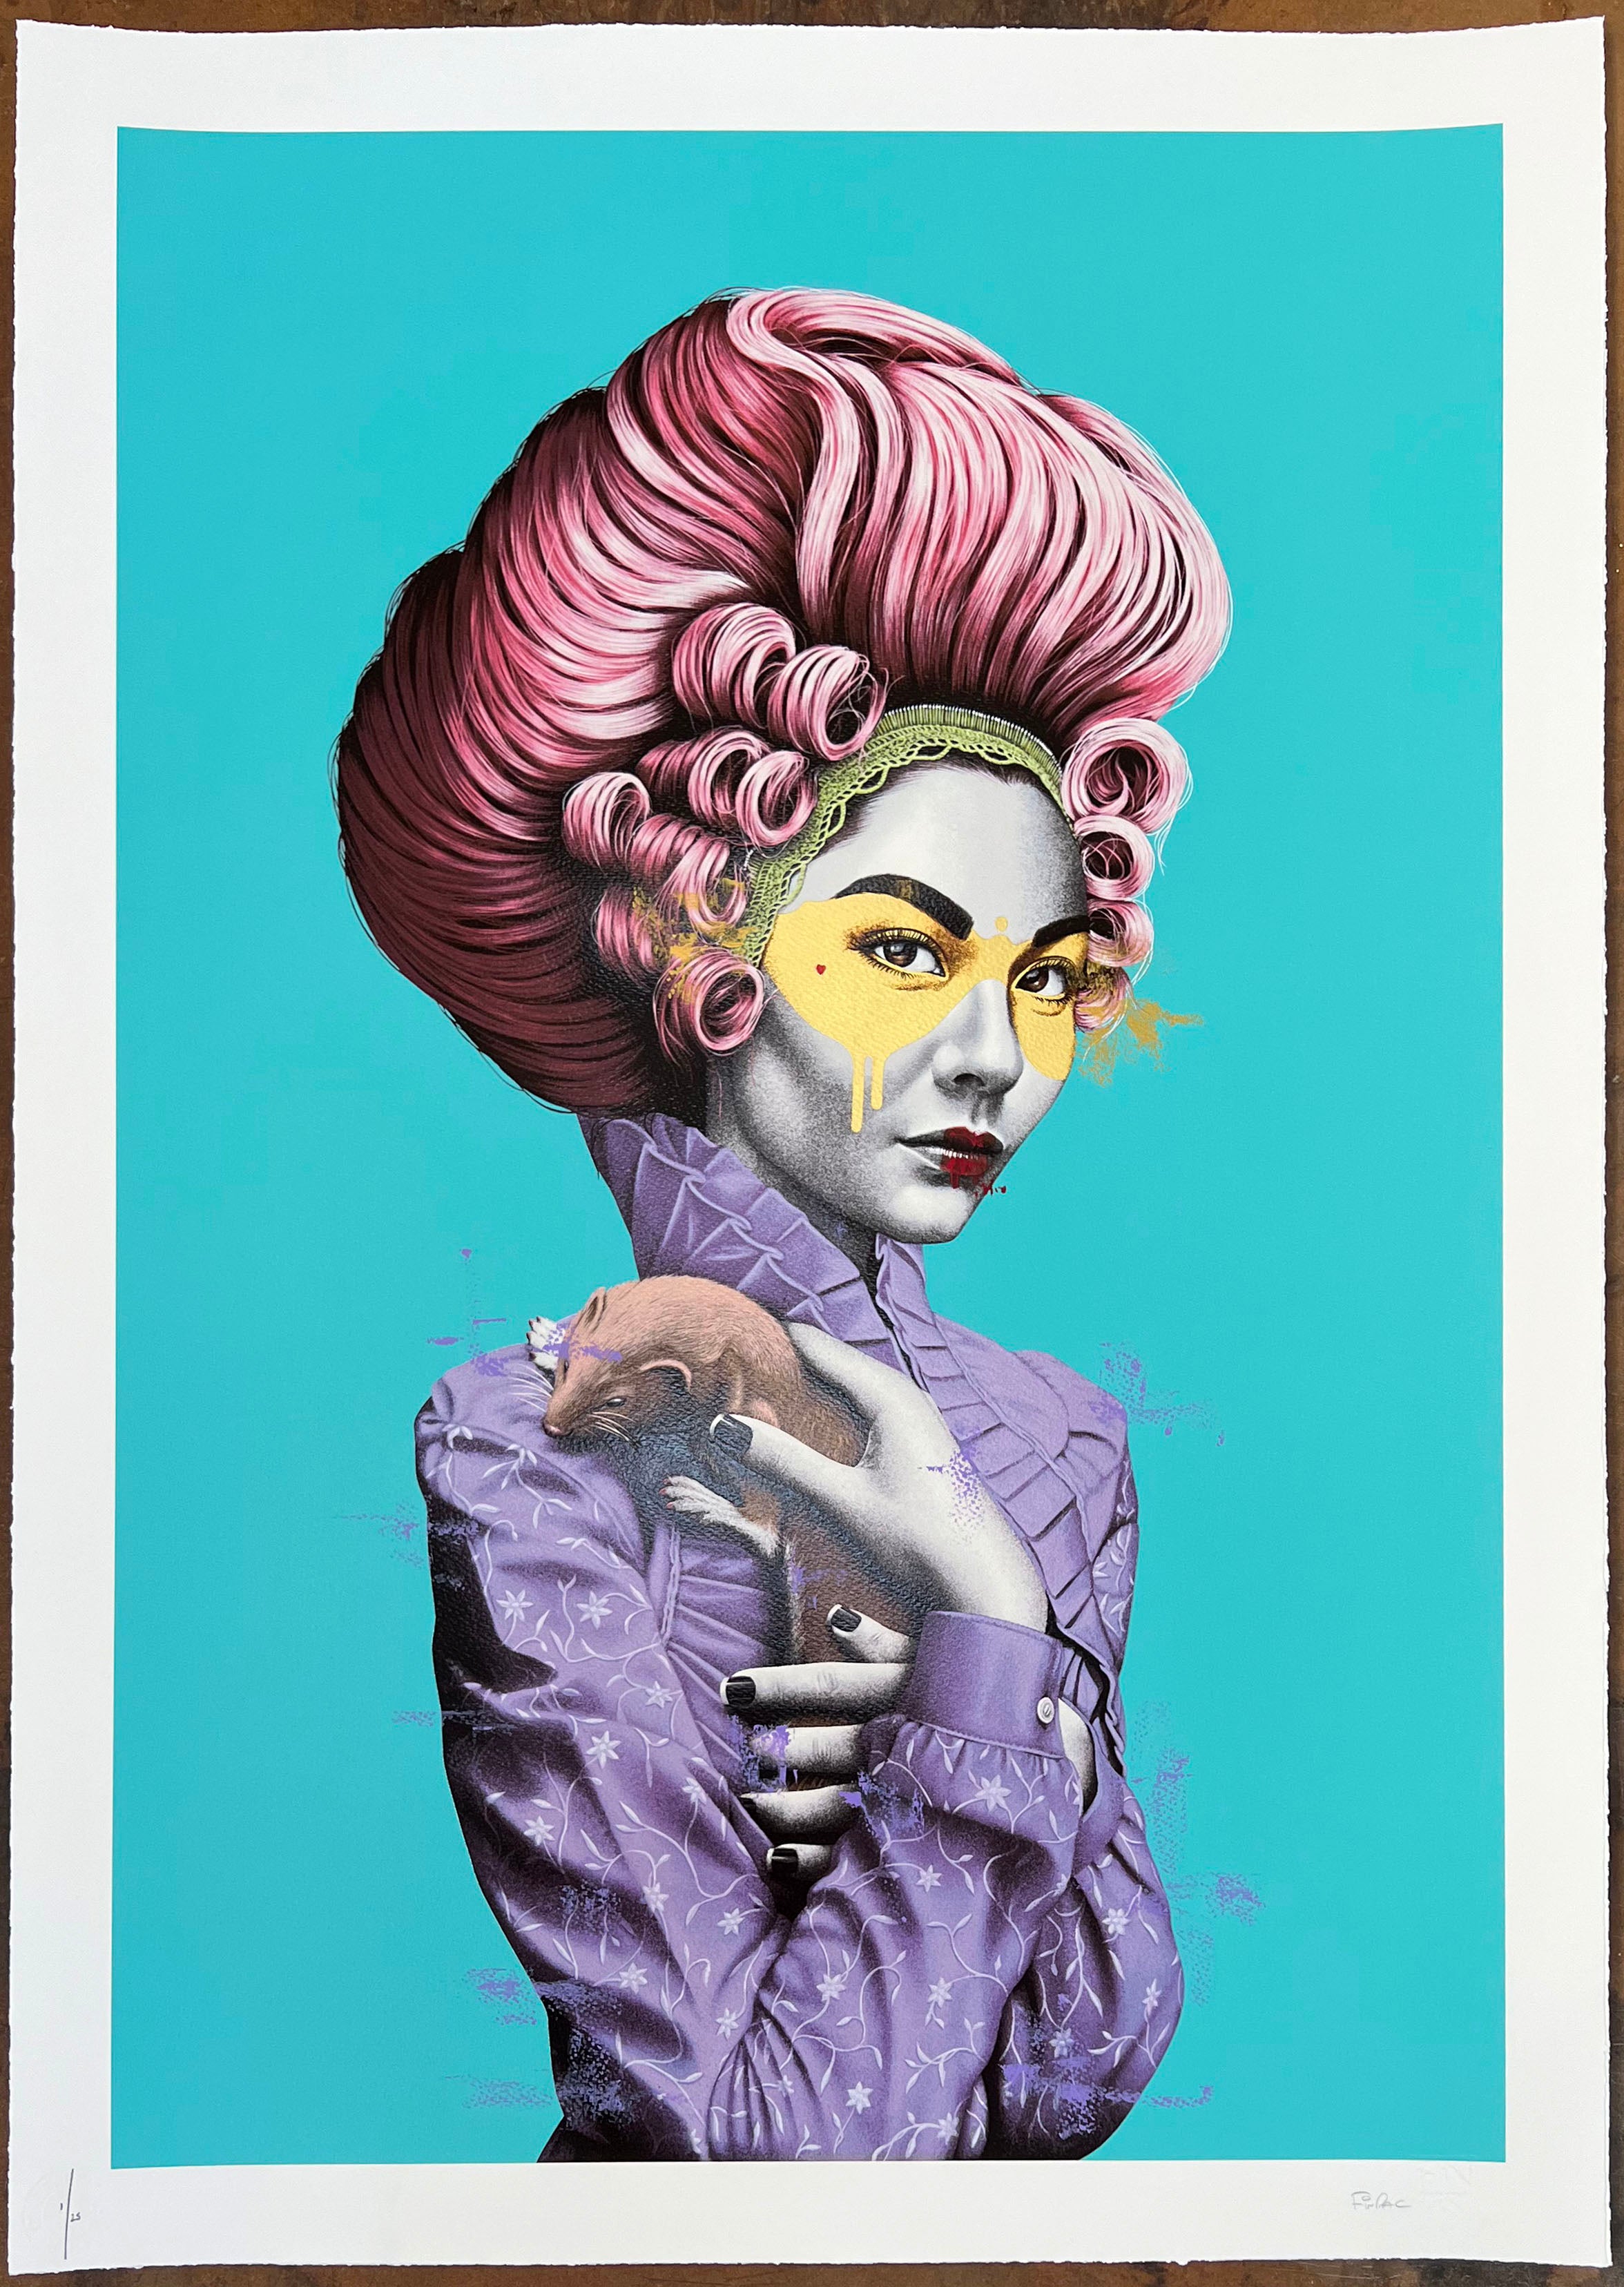 FINDAC TULLERIES TURQUOISE GOLD LEAF HAND FINISHED ED OF 25